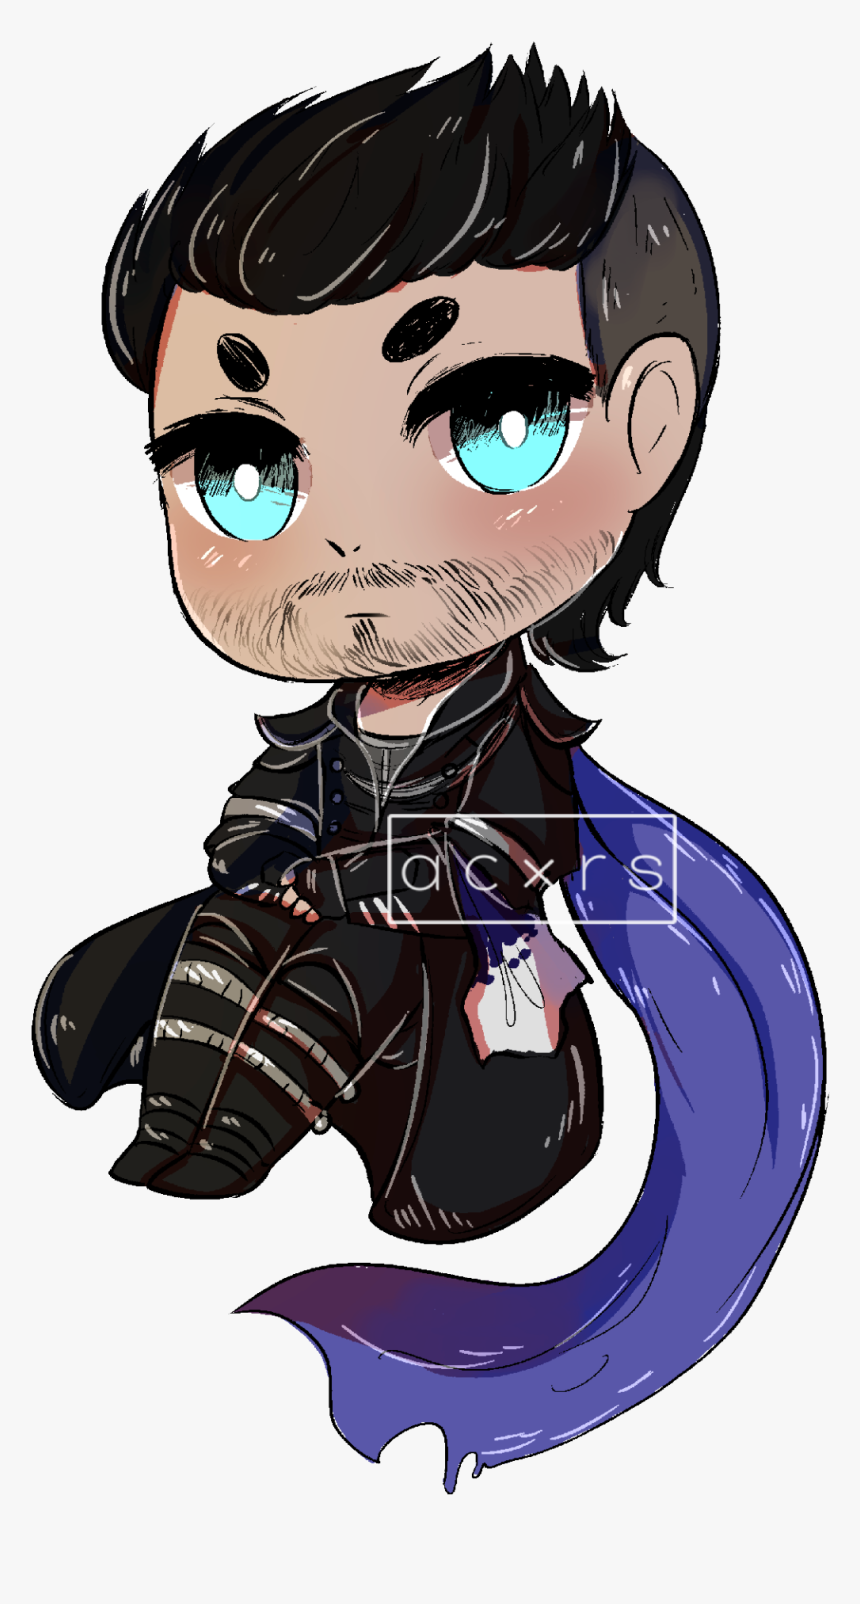 “nyx Ulric Chibi That Was Commissioned By A Friend - Cartoon, HD Png Download, Free Download